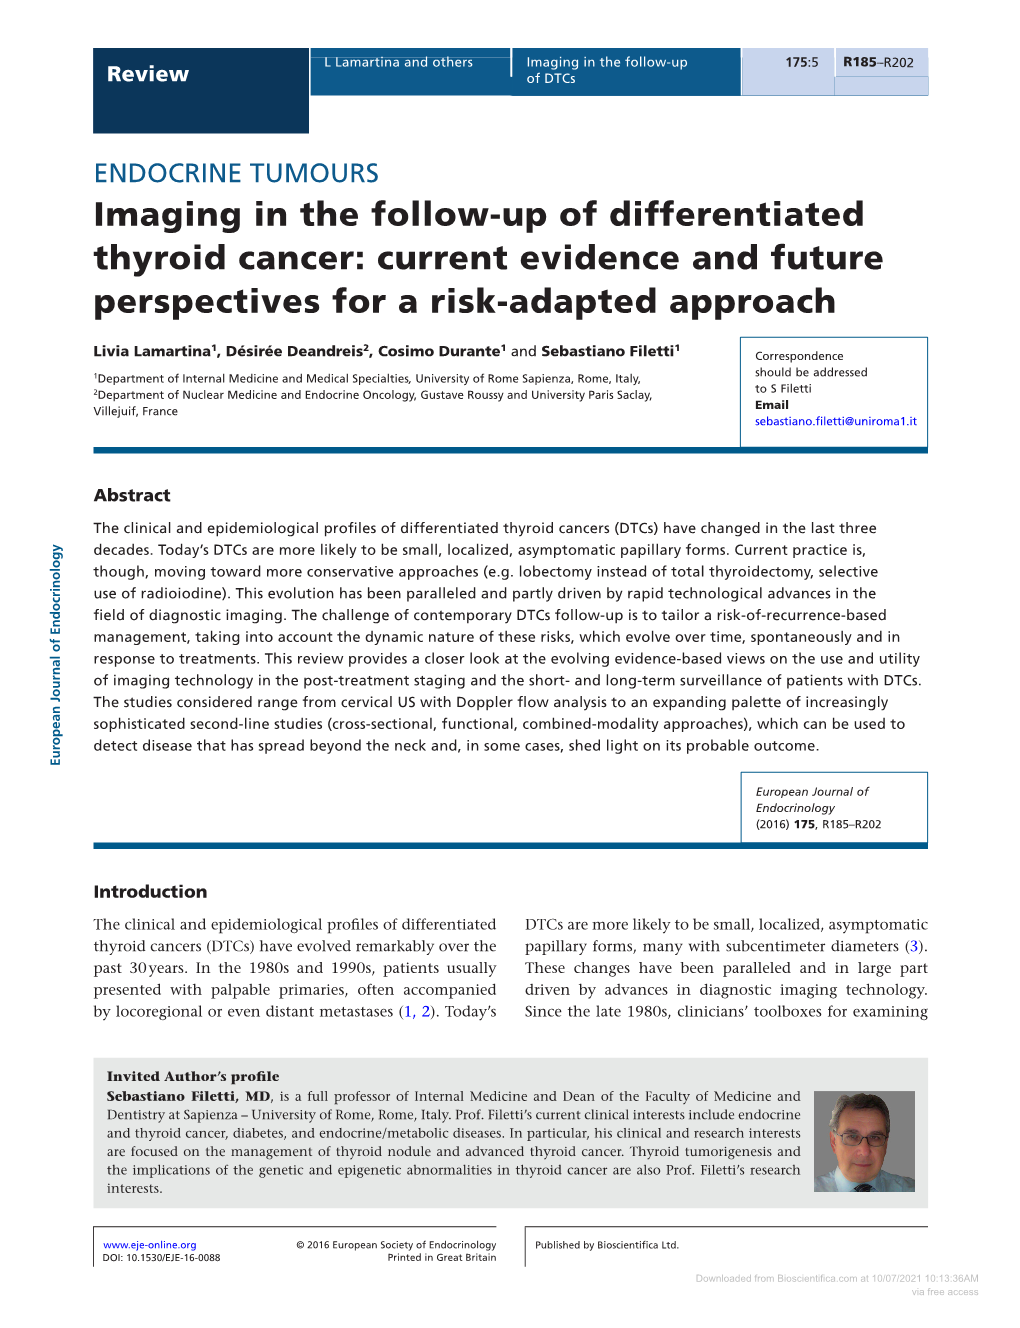 Imaging in the Follow-Up of Differentiated Thyroid Cancer: Current Evidence and Future Perspectives for a Risk-Adapted Approach